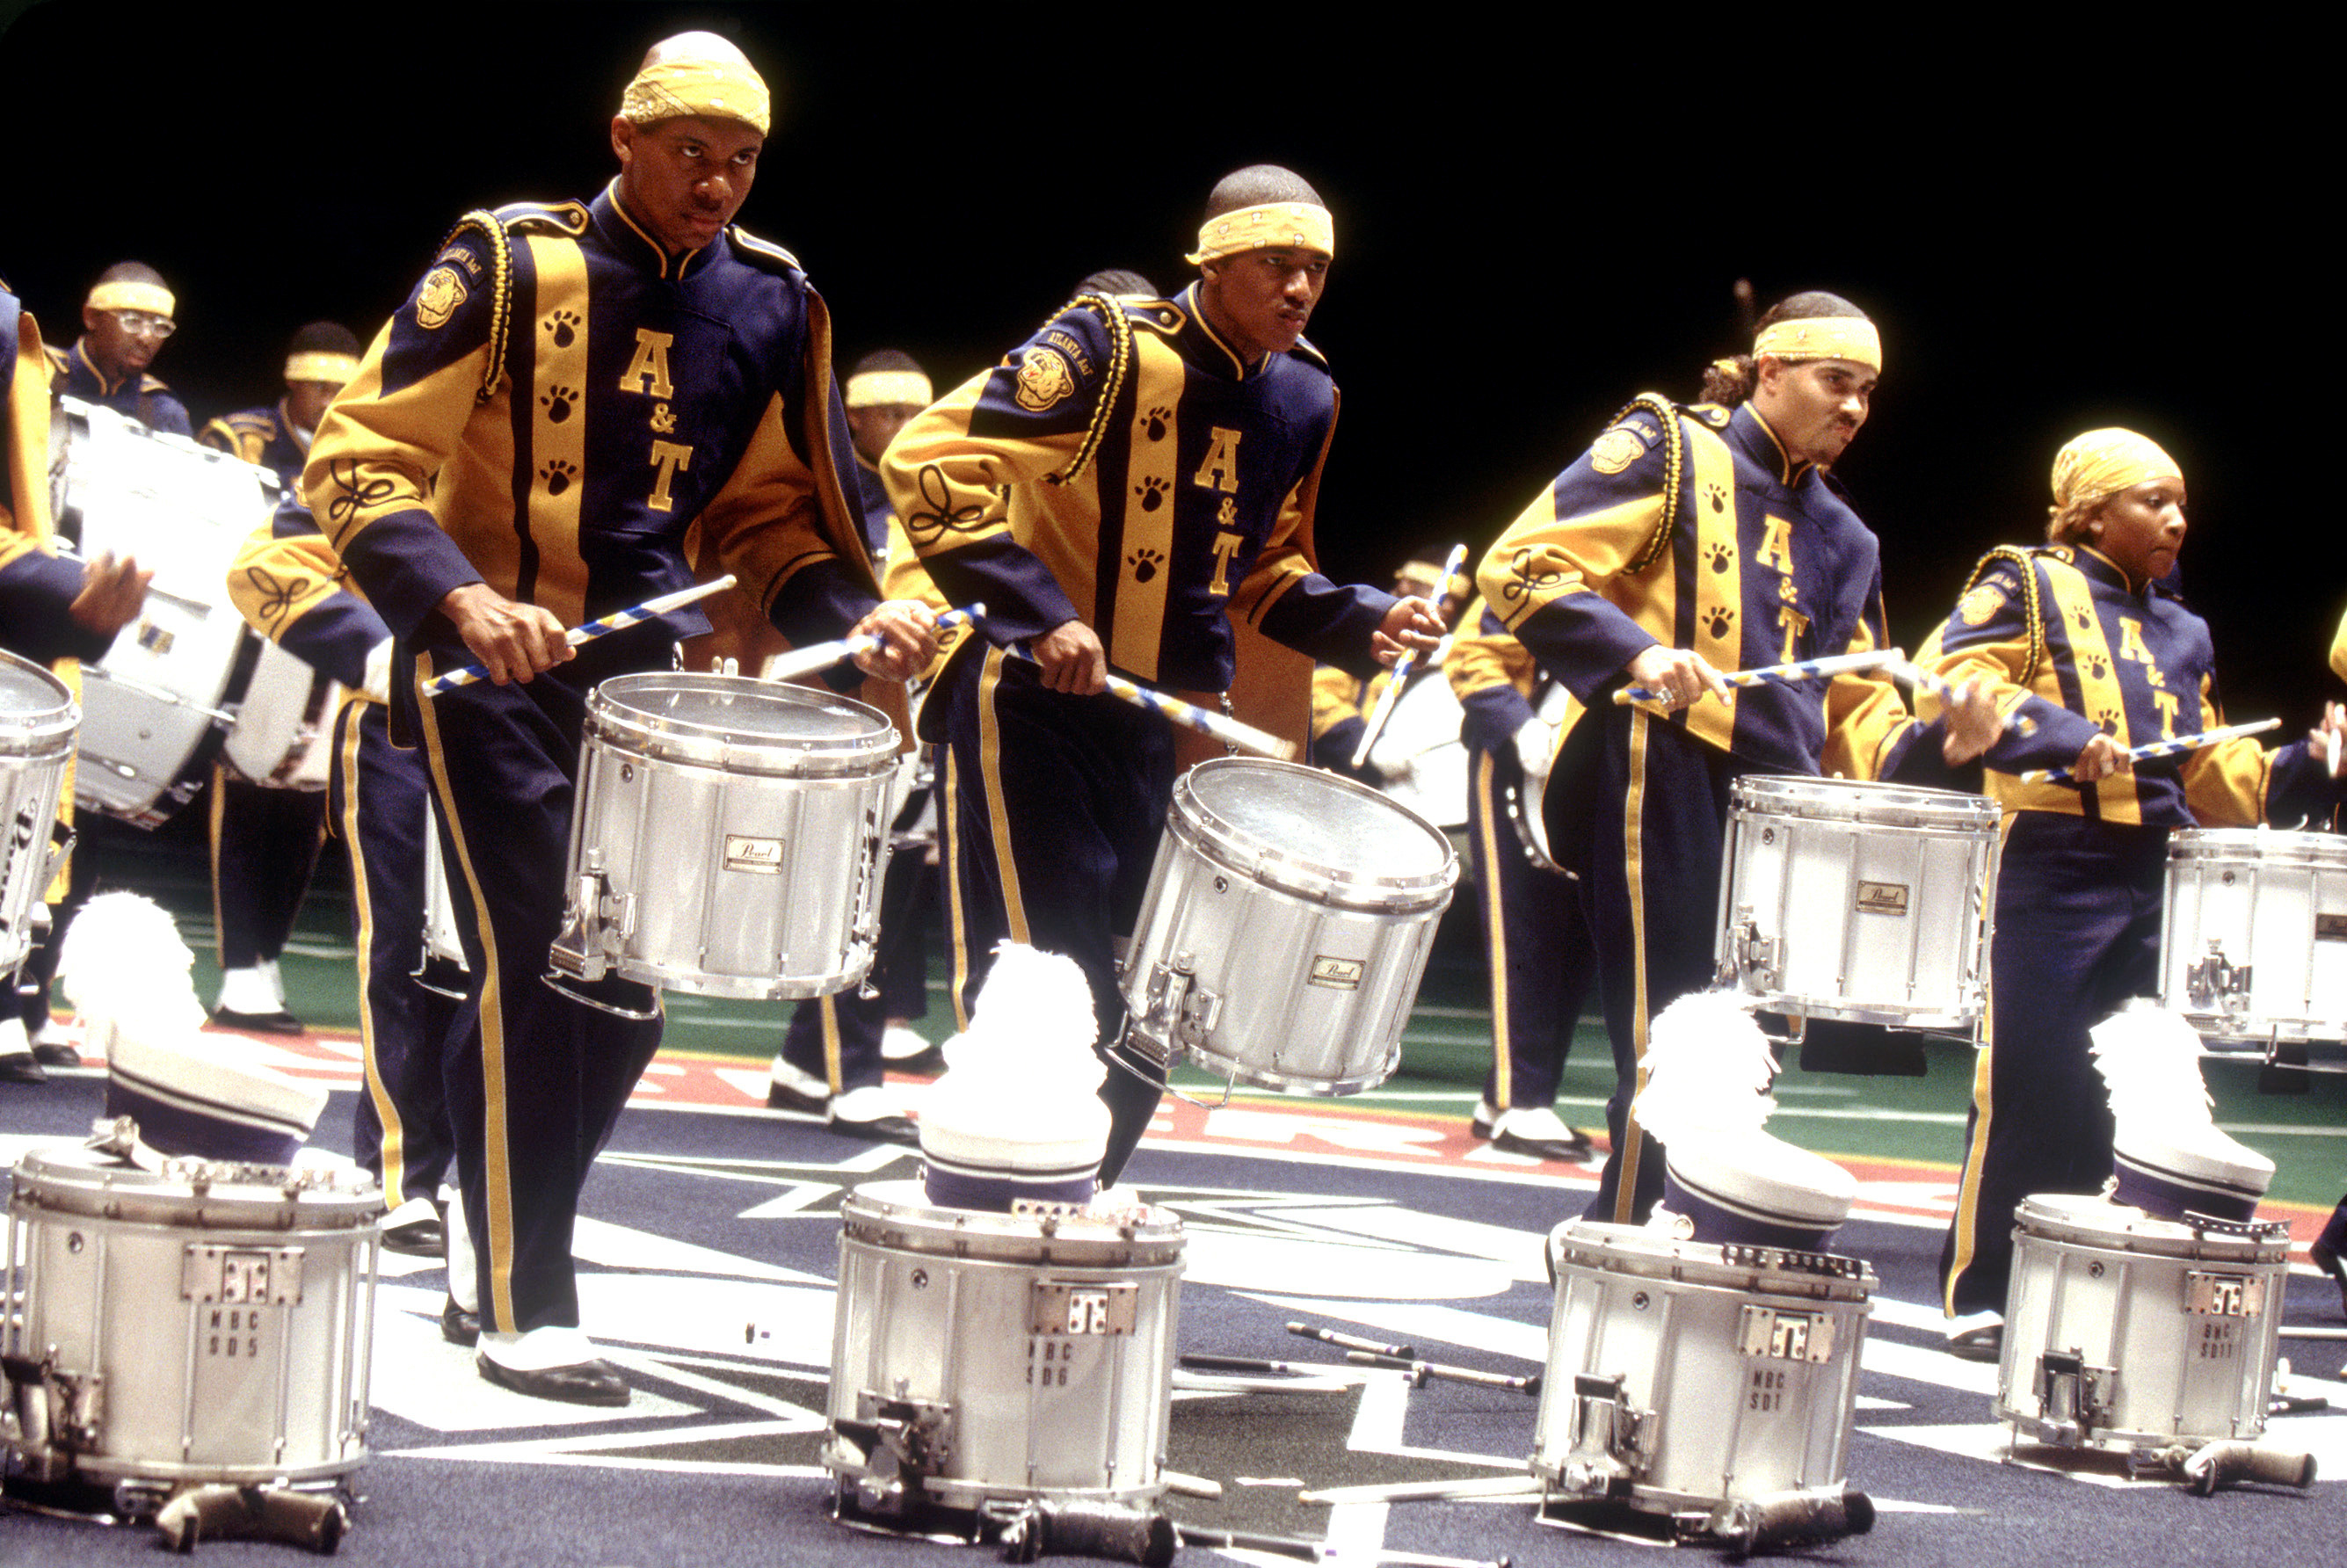 Leonard Roberts and Nick Cannon in a drumline.